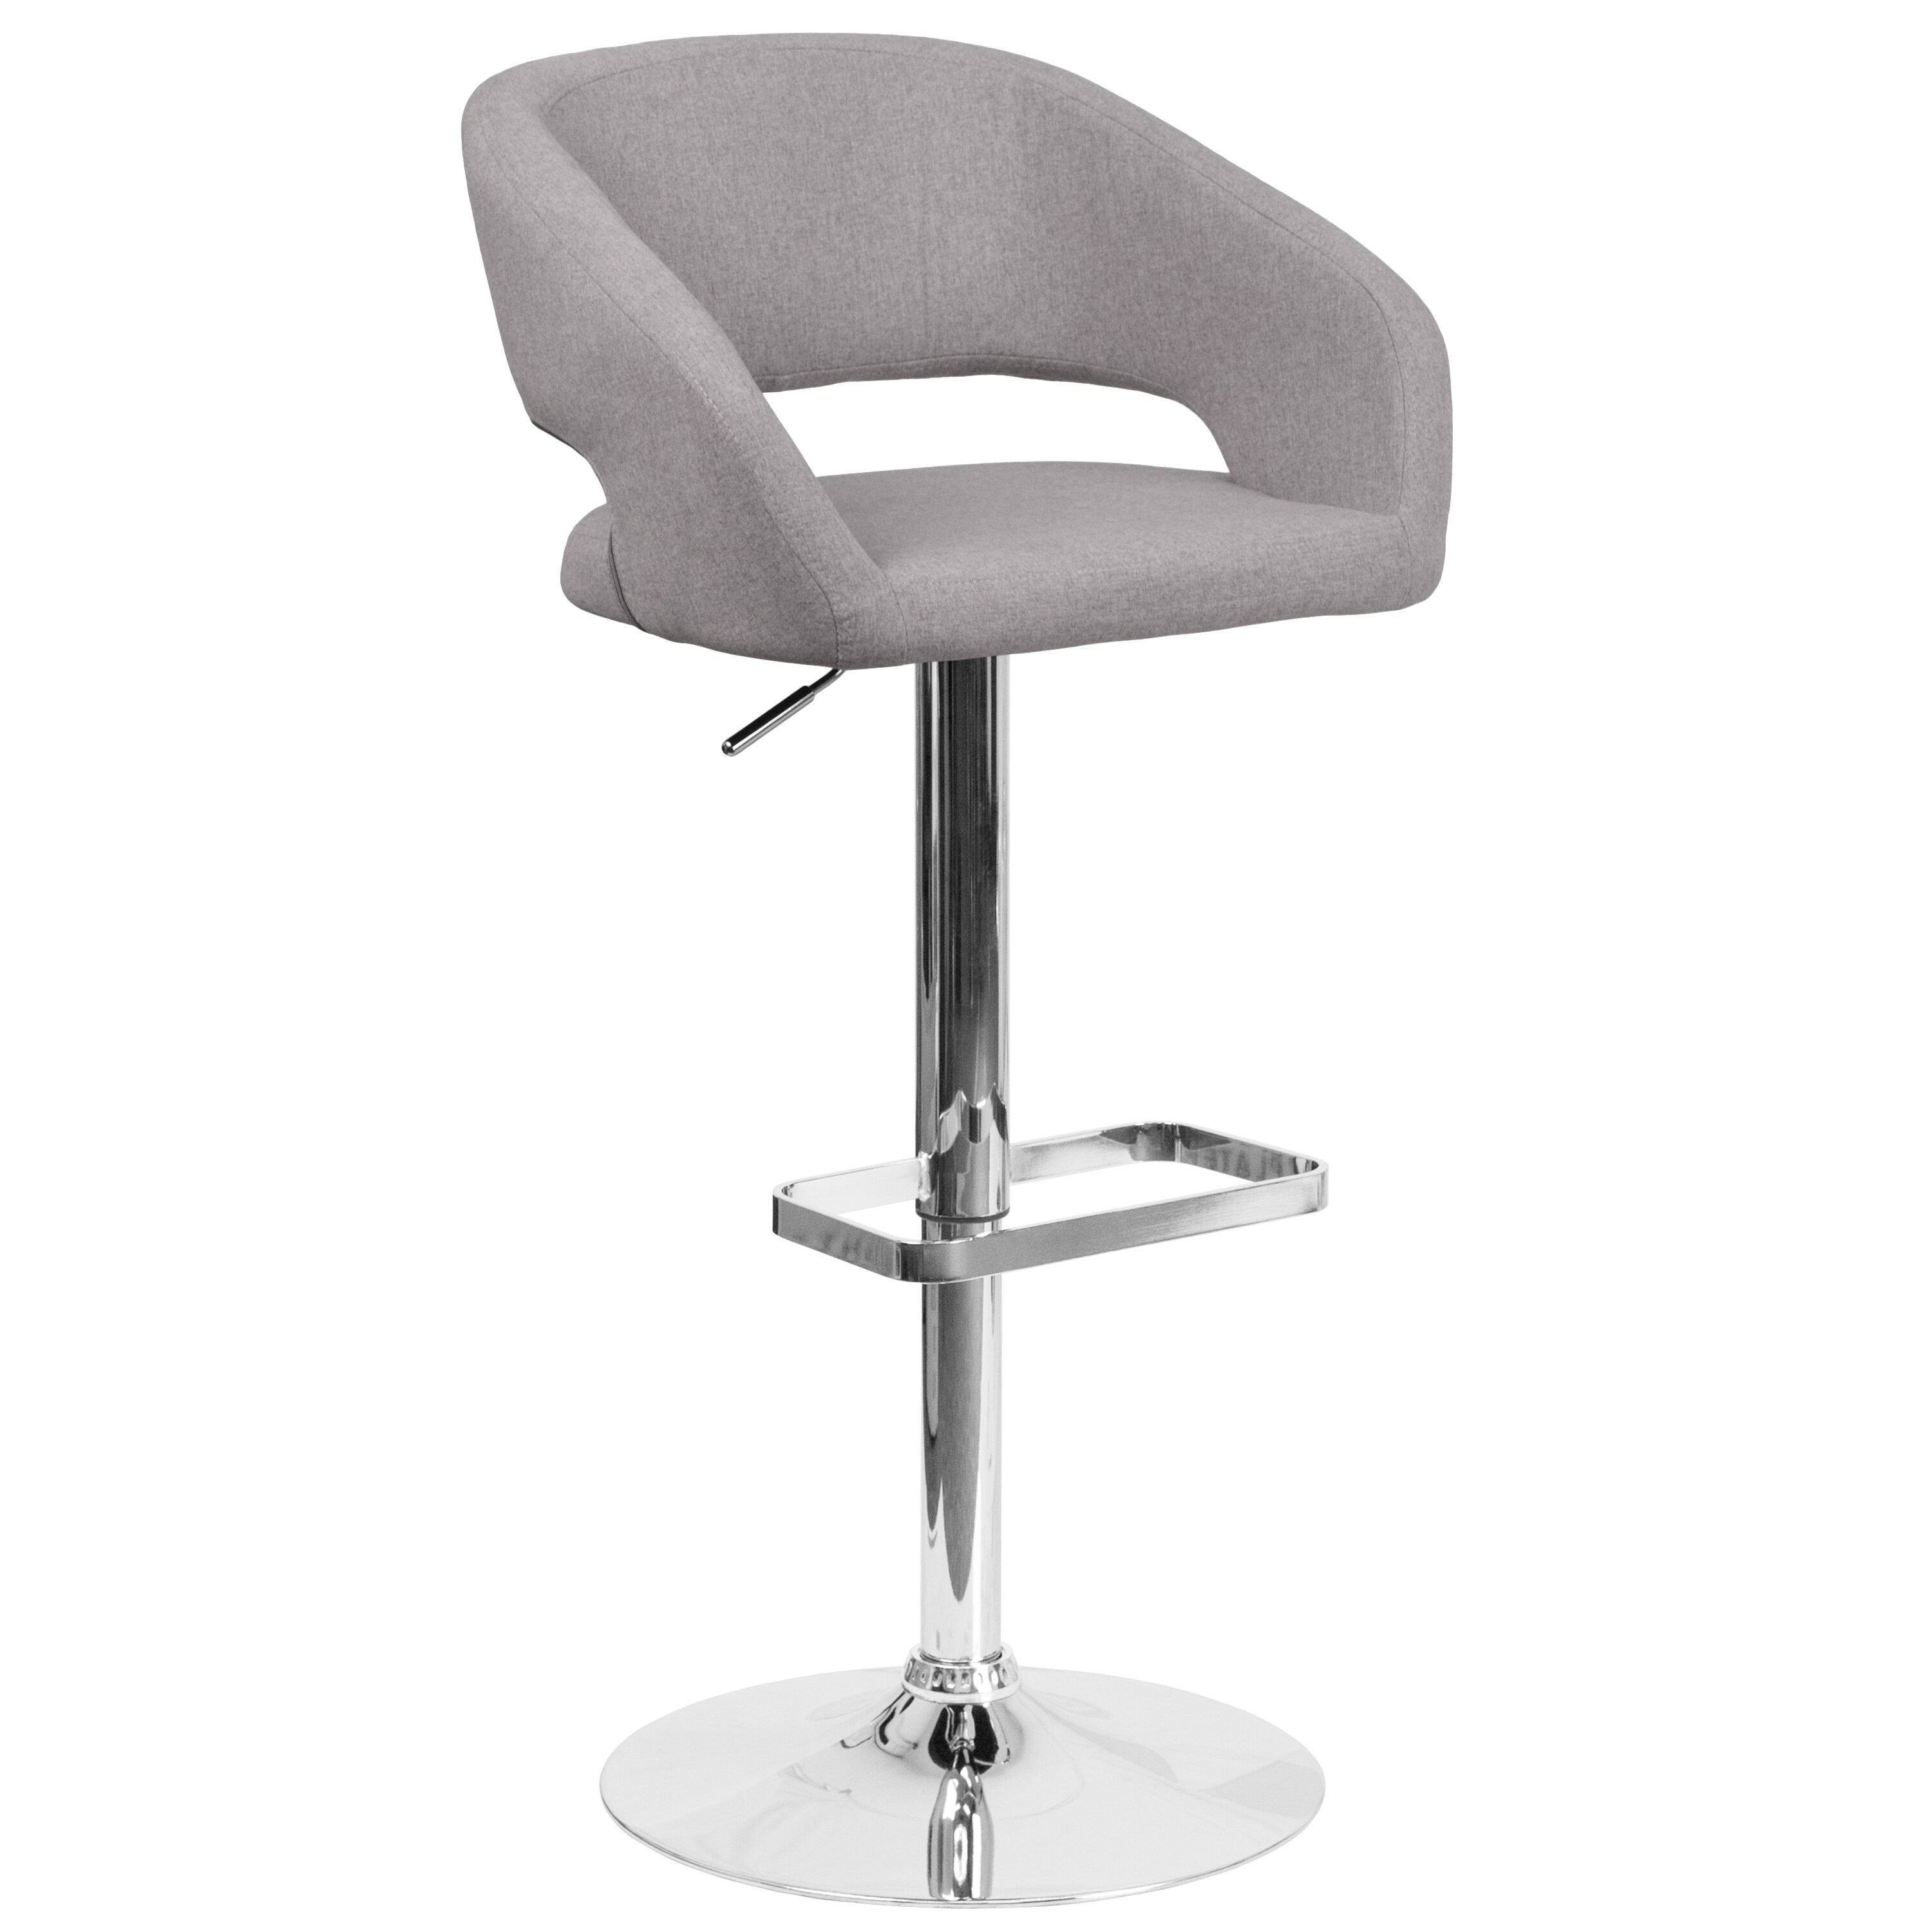 CONTEMPORARY GRAY FABRIC ADJUSTABLE HEIGHT BARSTOOL WITH CHROME BASE 